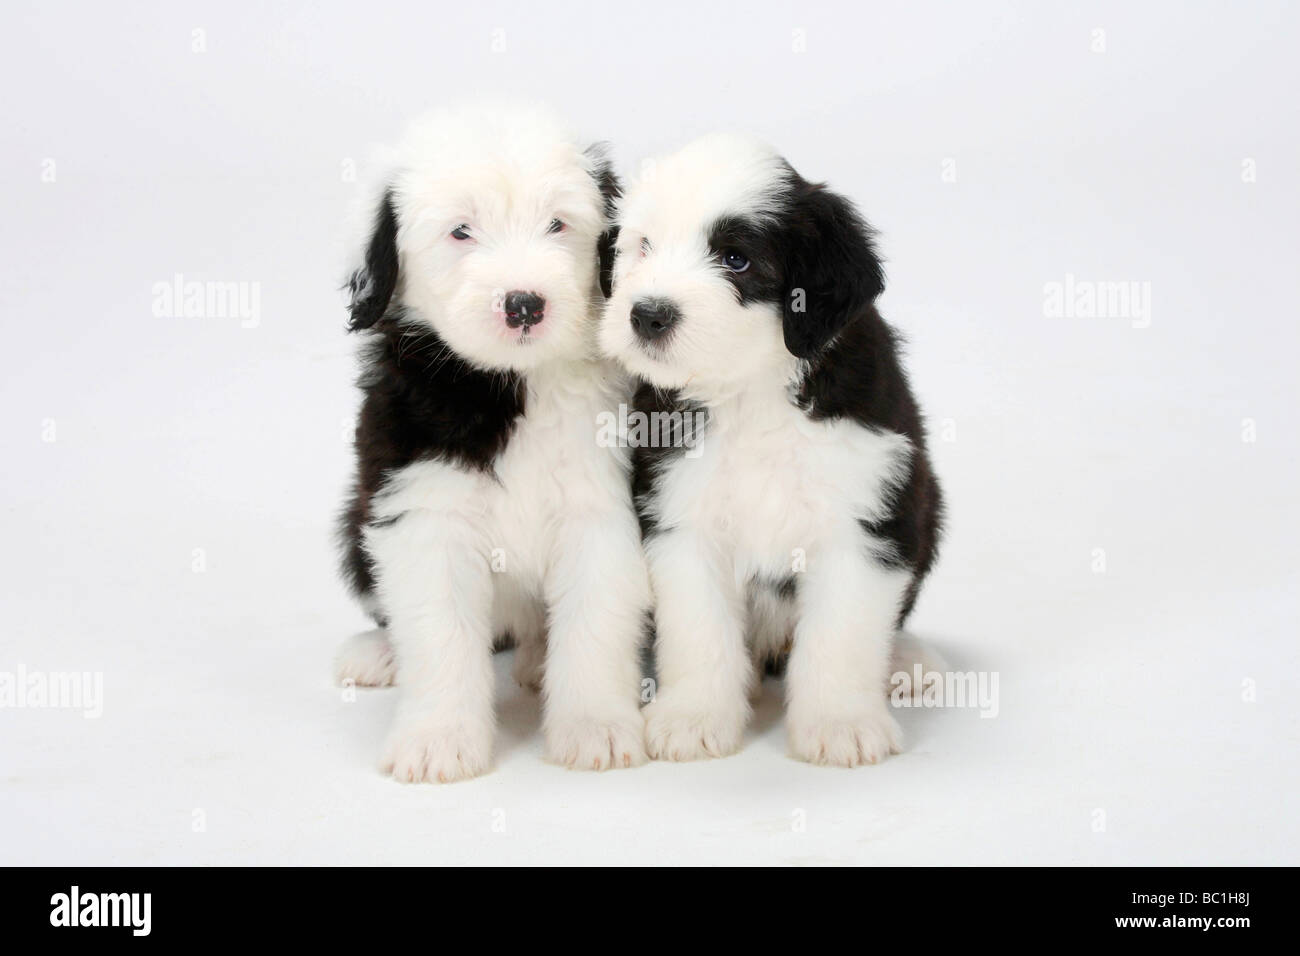 Puppy Of Old English Sheepdog In Snowy Field Stock Photo, Picture and  Royalty Free Image. Image 11977457.